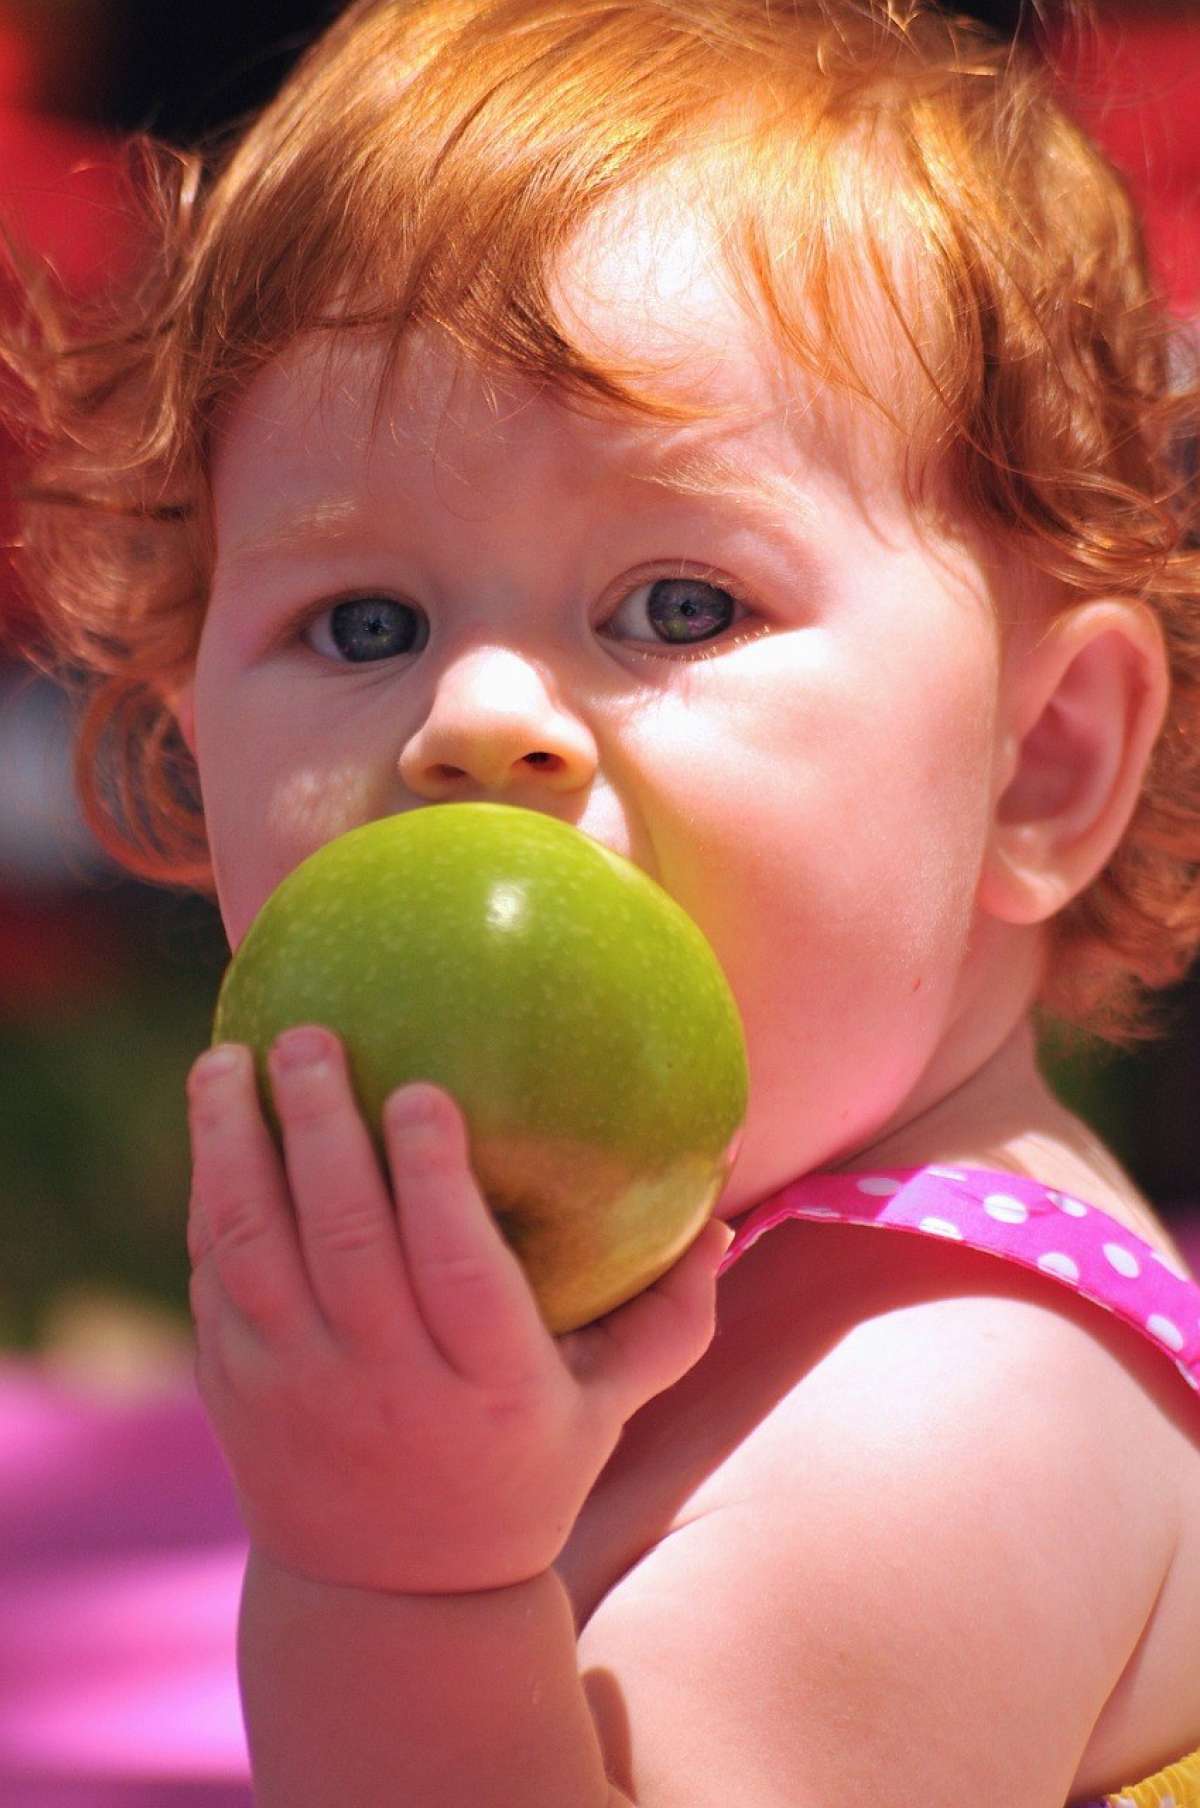 A young girl eating an apple